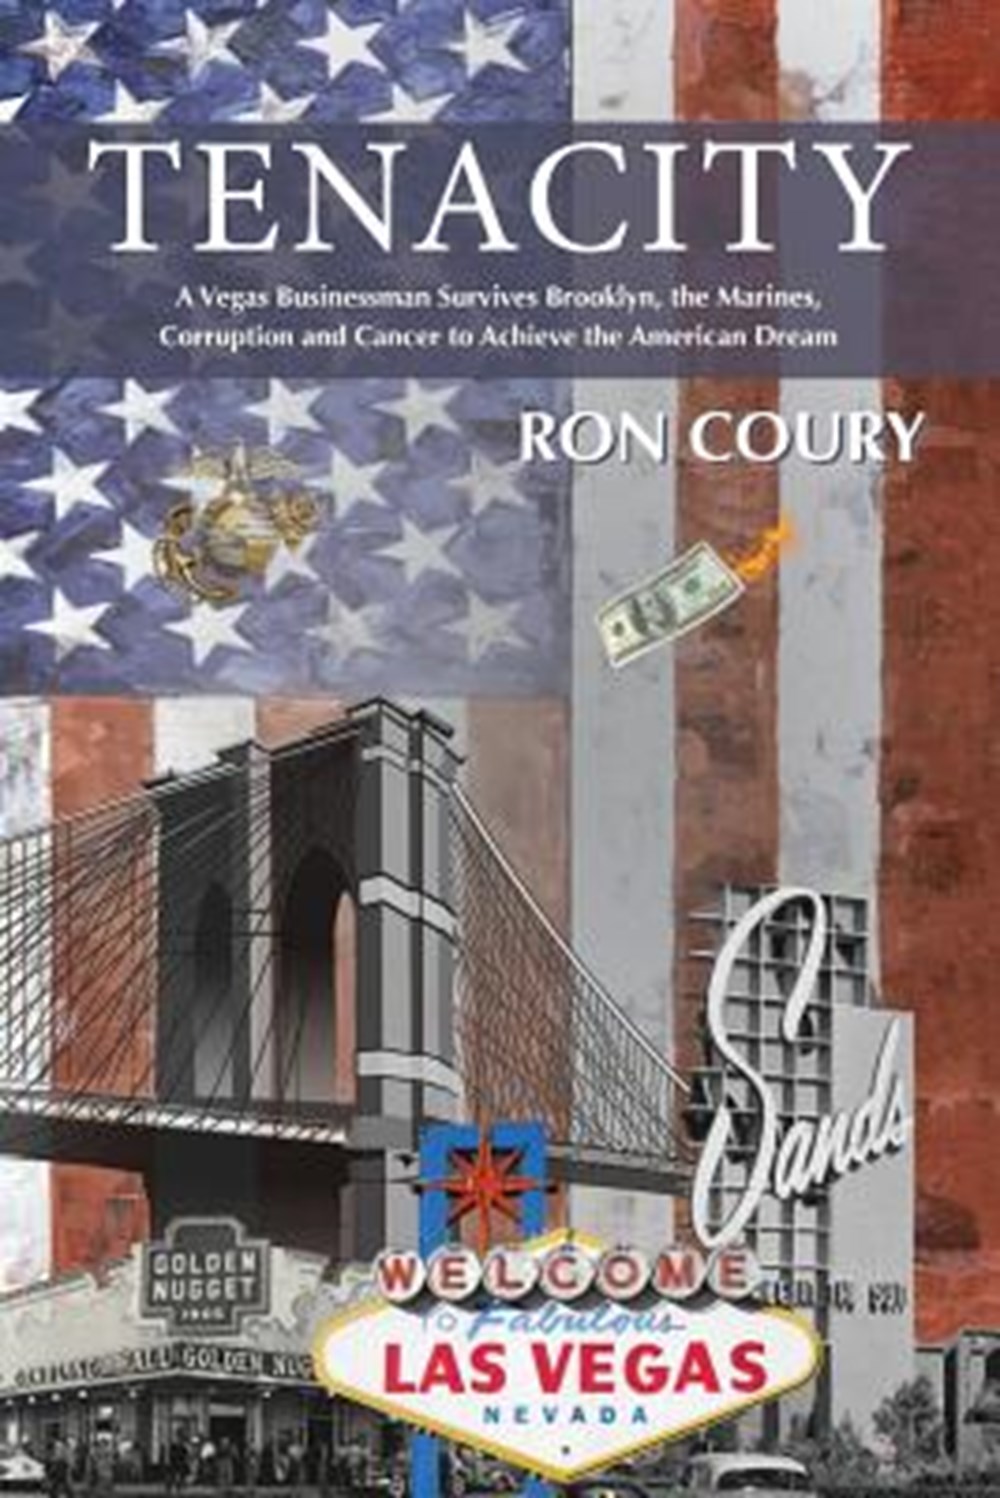 Tenacity A Vegas Businessman Survives Brooklyn, the Marines, Corruption and Cancer to Achieve the Am